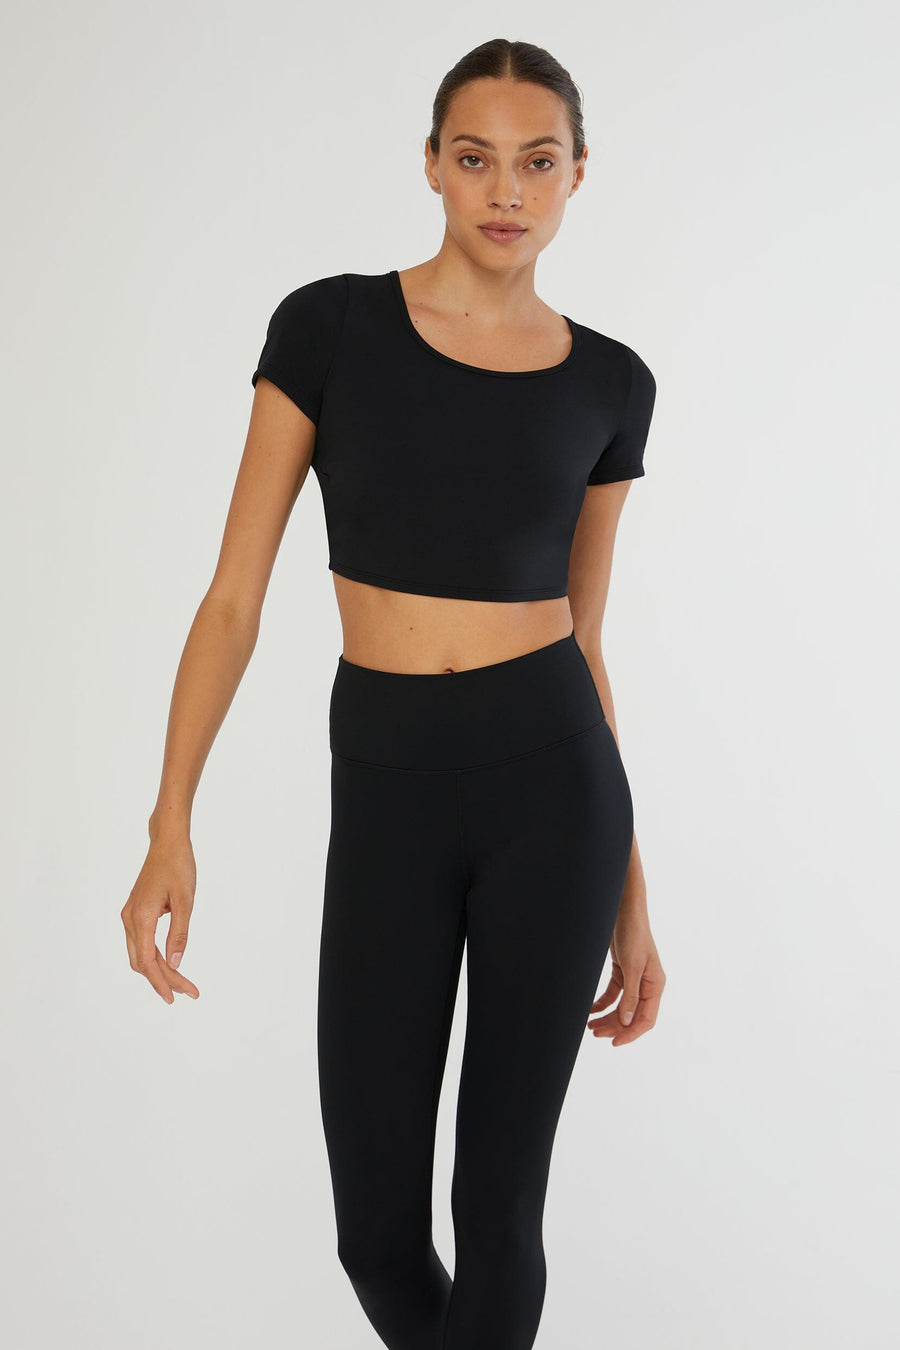 IVL Collective - Classic Black for the win. Long sleeve top